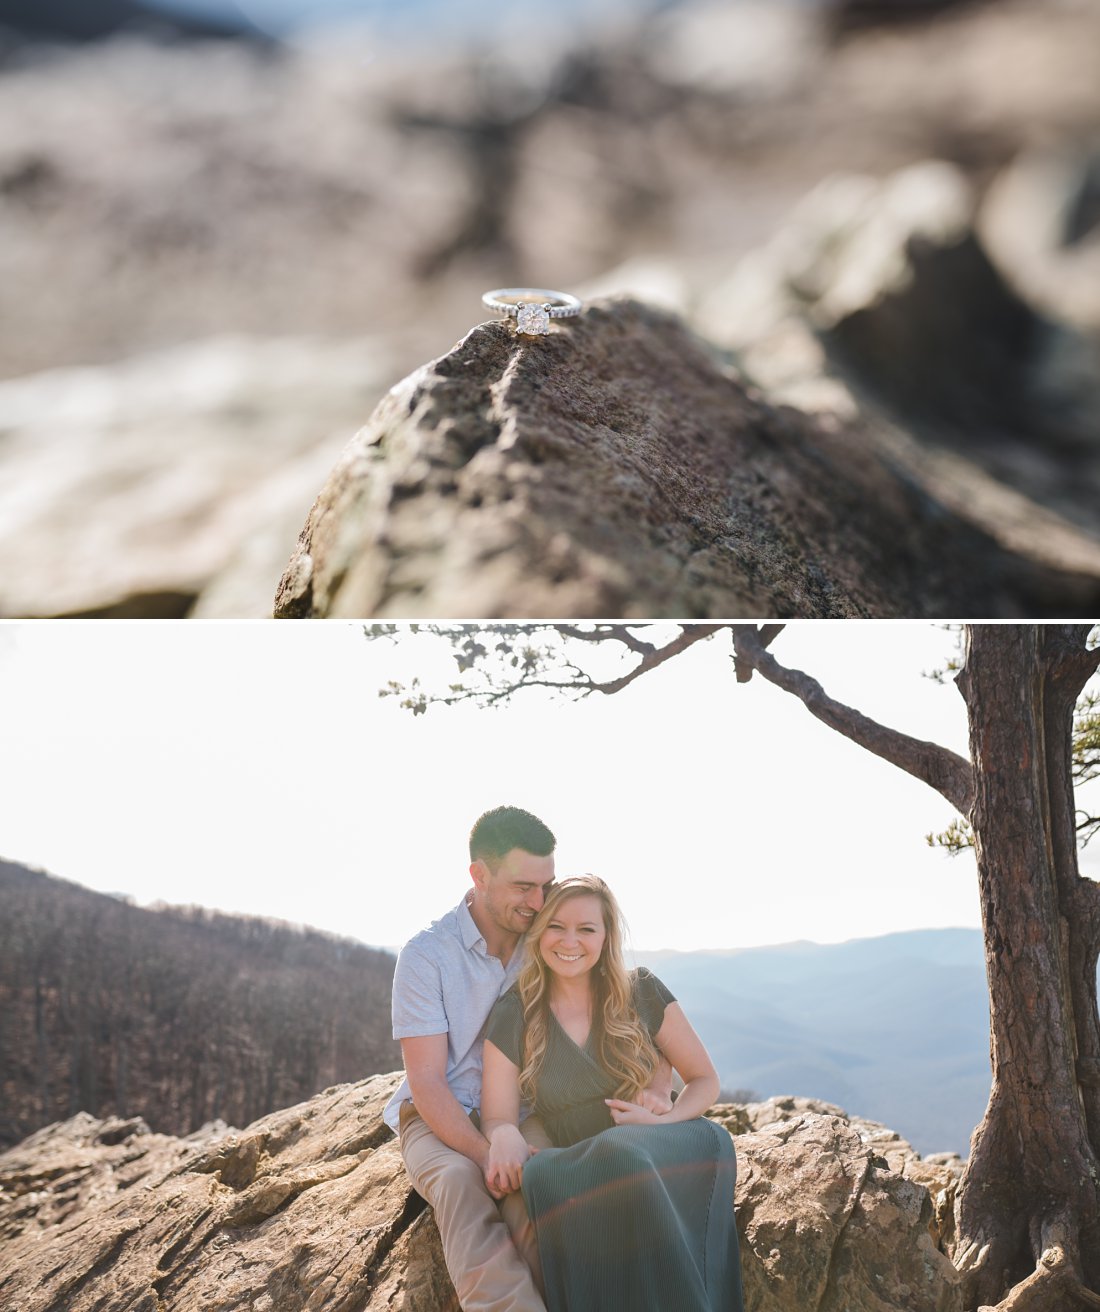 Engagement ring balancing on a rock | Blue Ridge Parkway Engagement Session